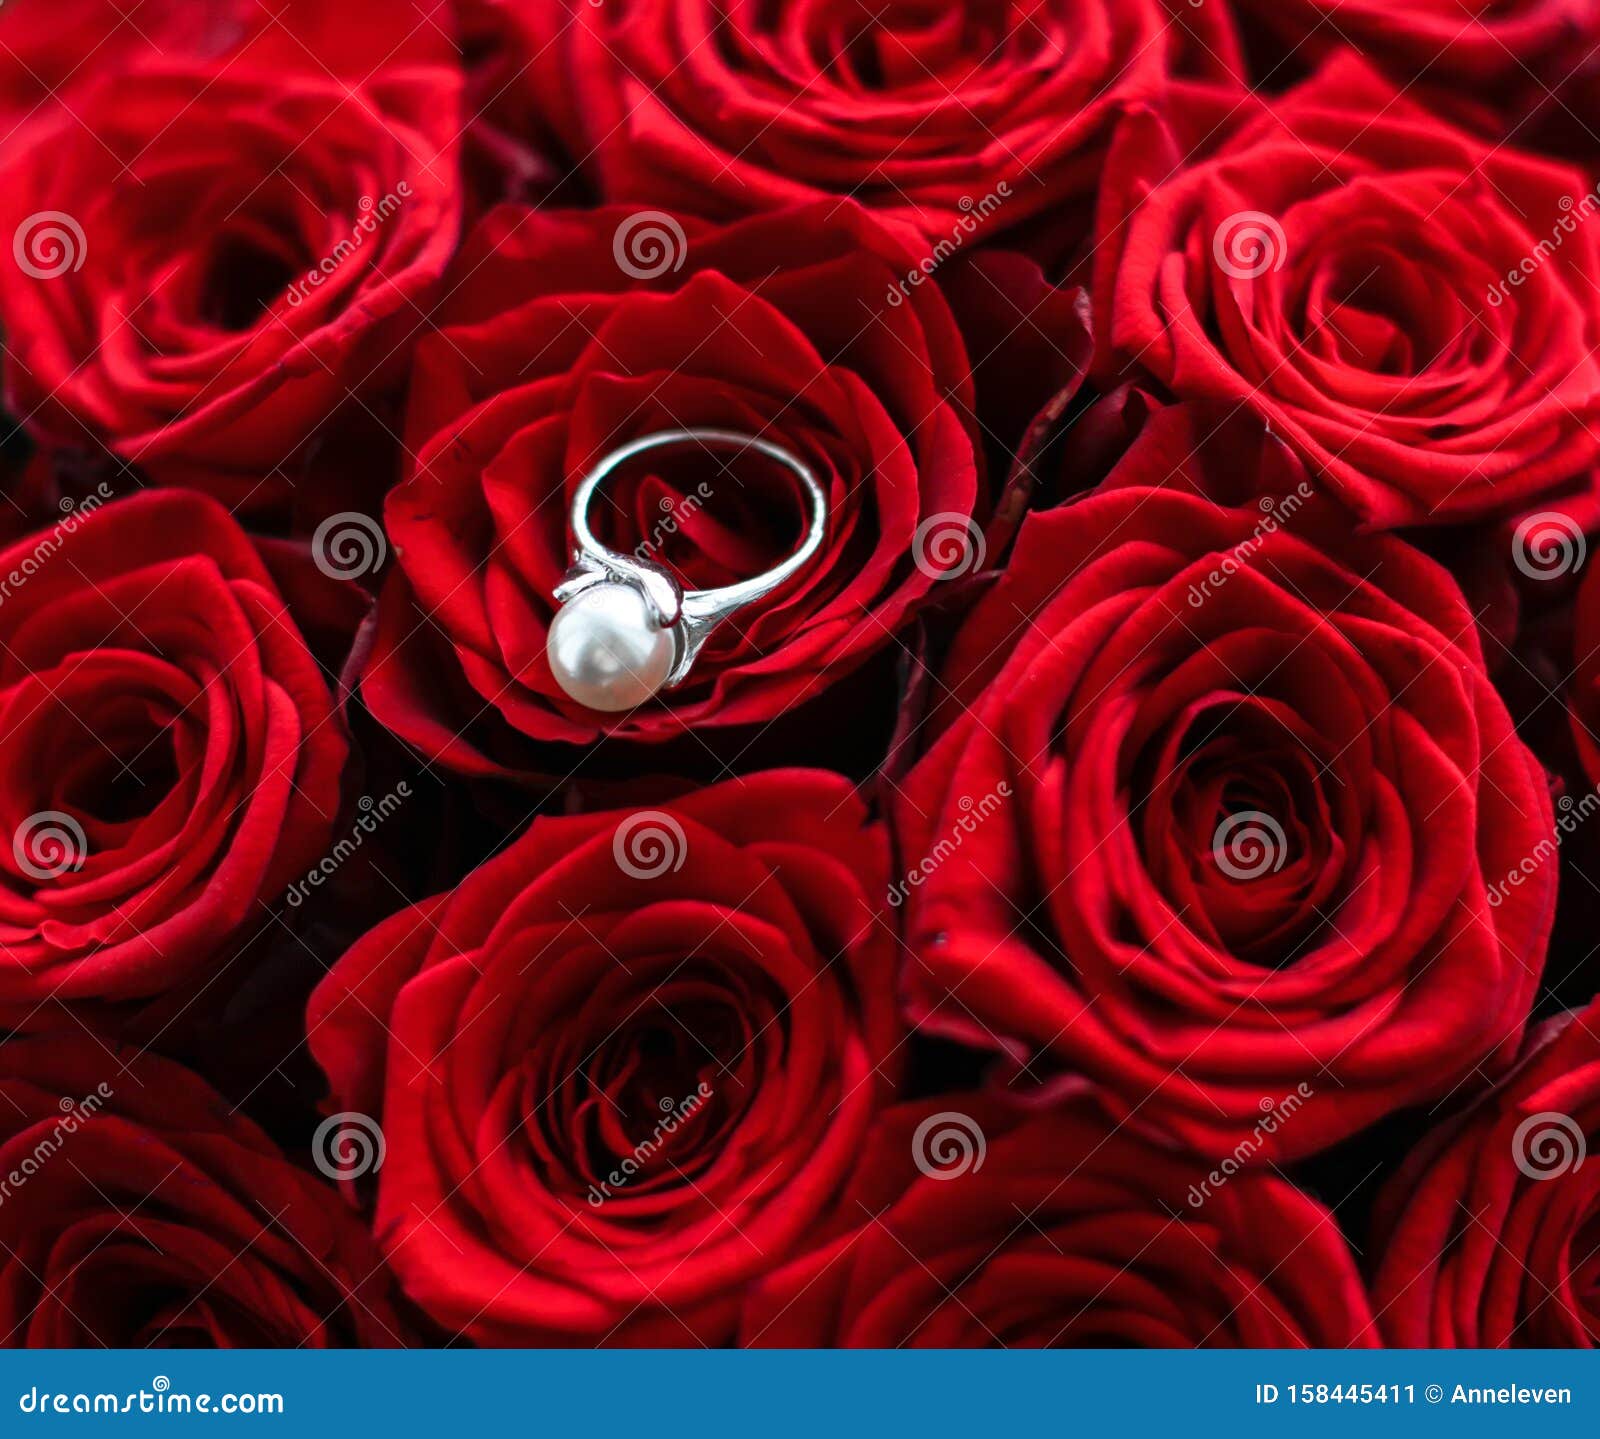 Beautiful White Gold Pearl Ring and Bouquet of Red Roses, Luxury ...